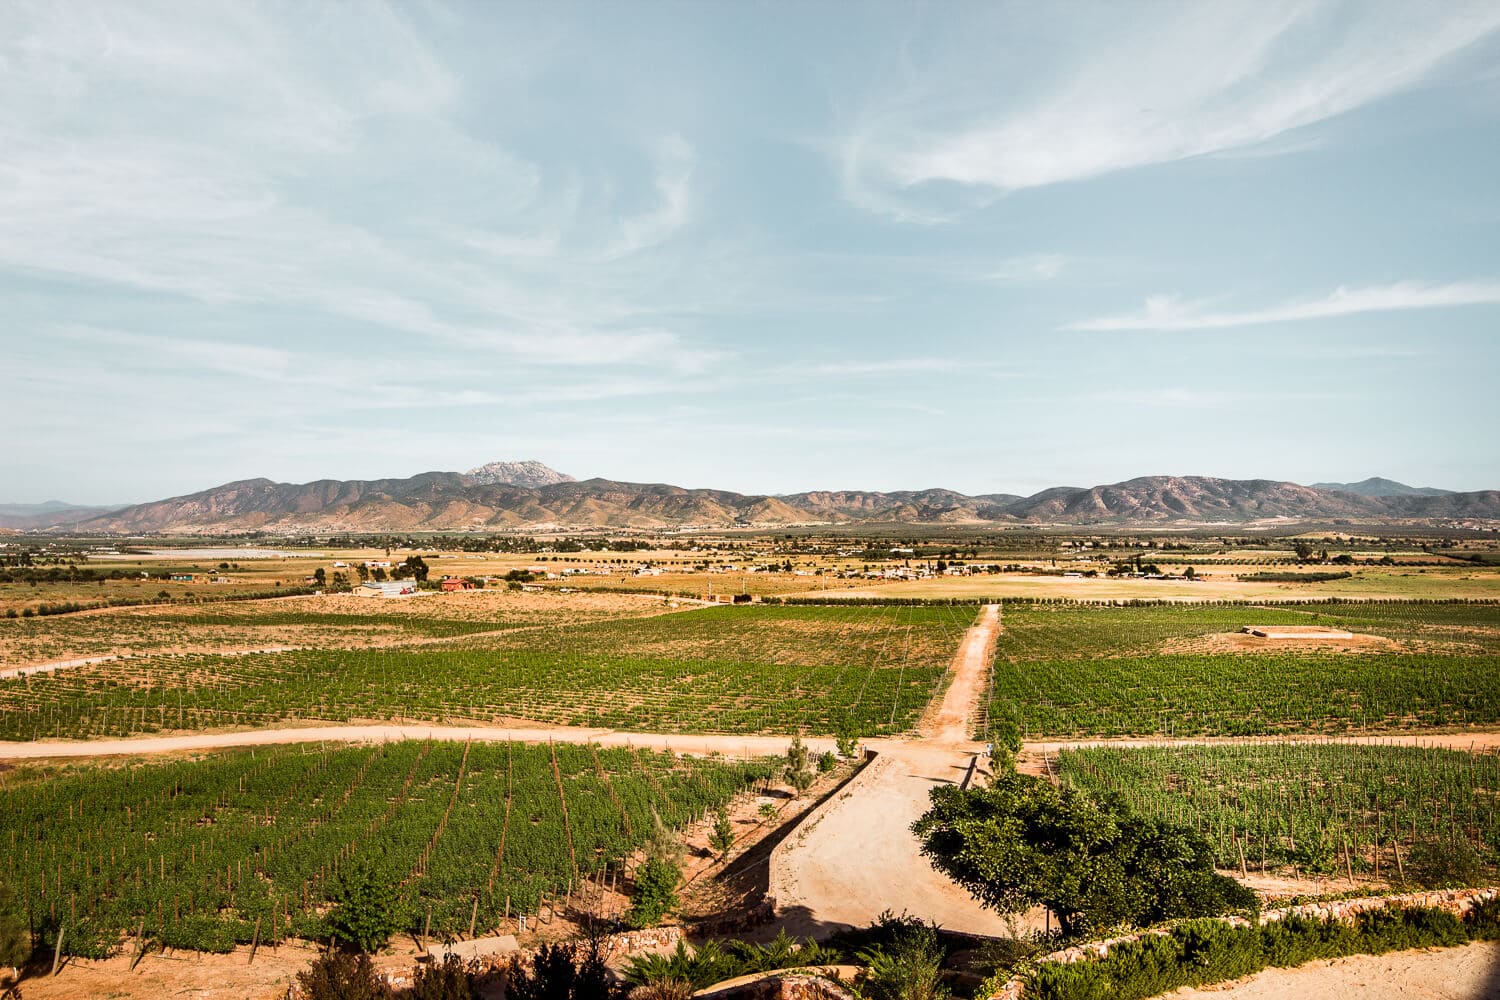 Las Nubes | Valle de Guadalupe is one of the most up and coming wine regions in the world. From it's innovative designs, picturesque views and award winning wines, keep reading to discover which Valle de Guadalupe wineries you shouldn't miss while in Baja California, Mexico. 